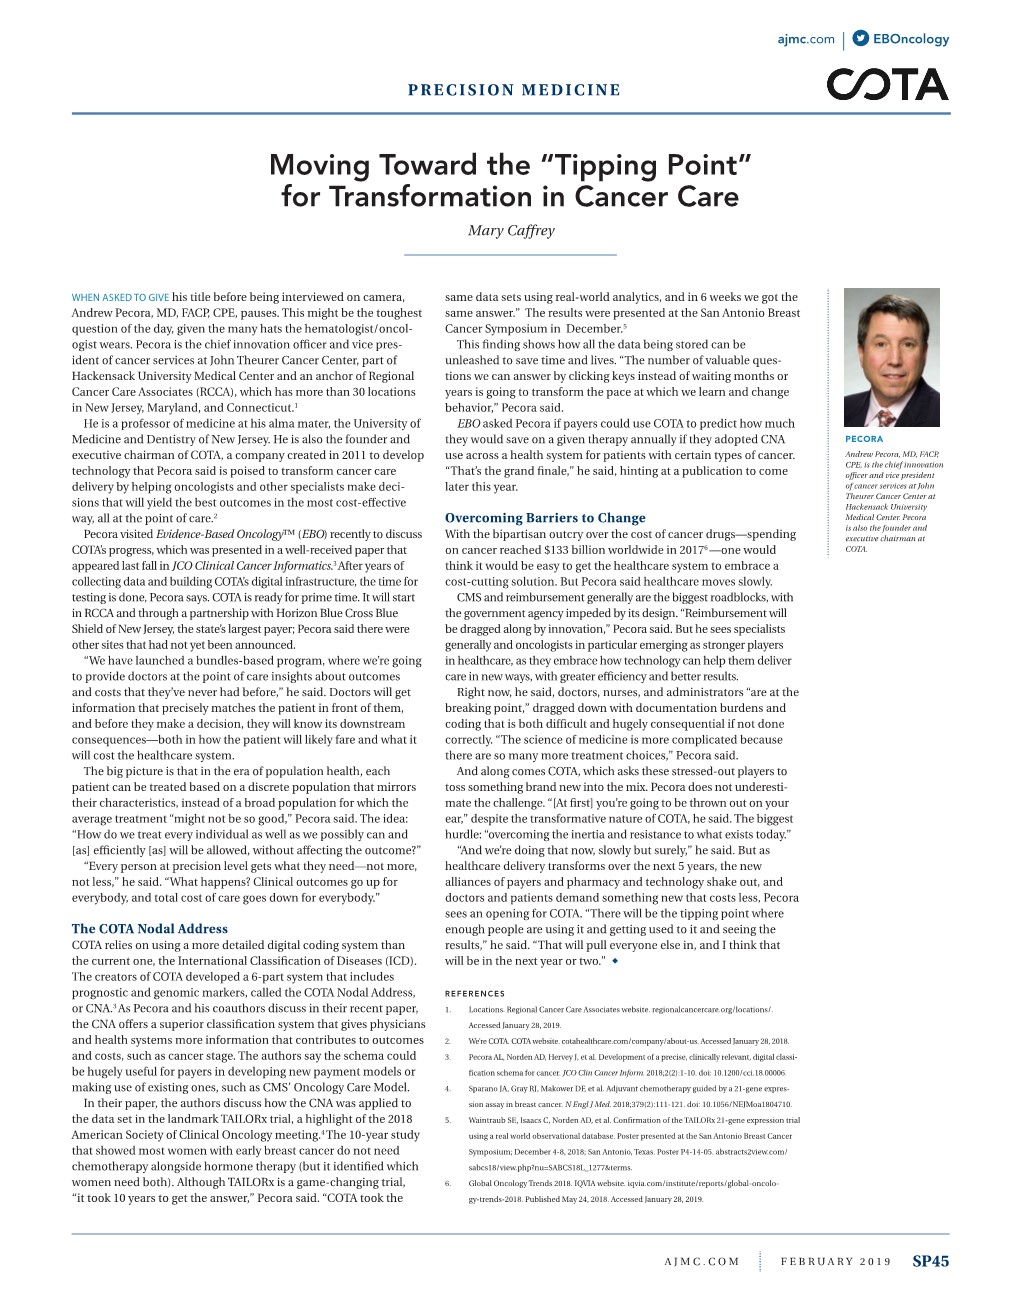 For Transformation in Cancer Care Mary Caffrey